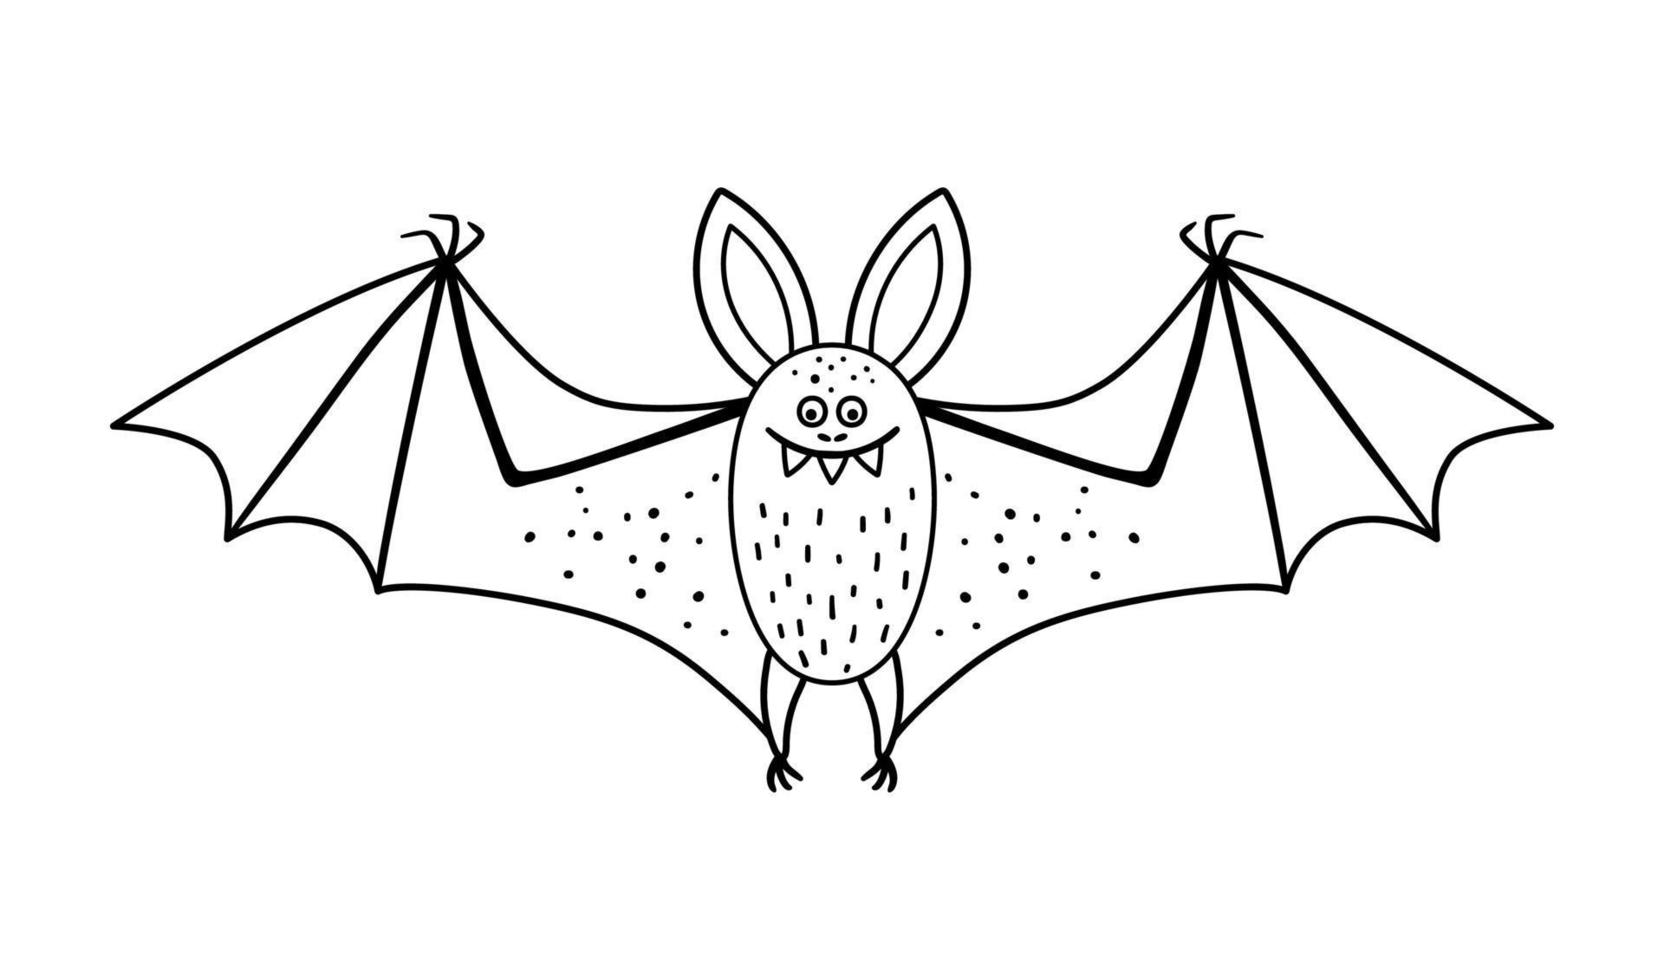 Cute vector black and white bat with spread wings. Halloween character icon. Autumn all saints eve illustration with flying animal. Samhain party coloring page for kids.